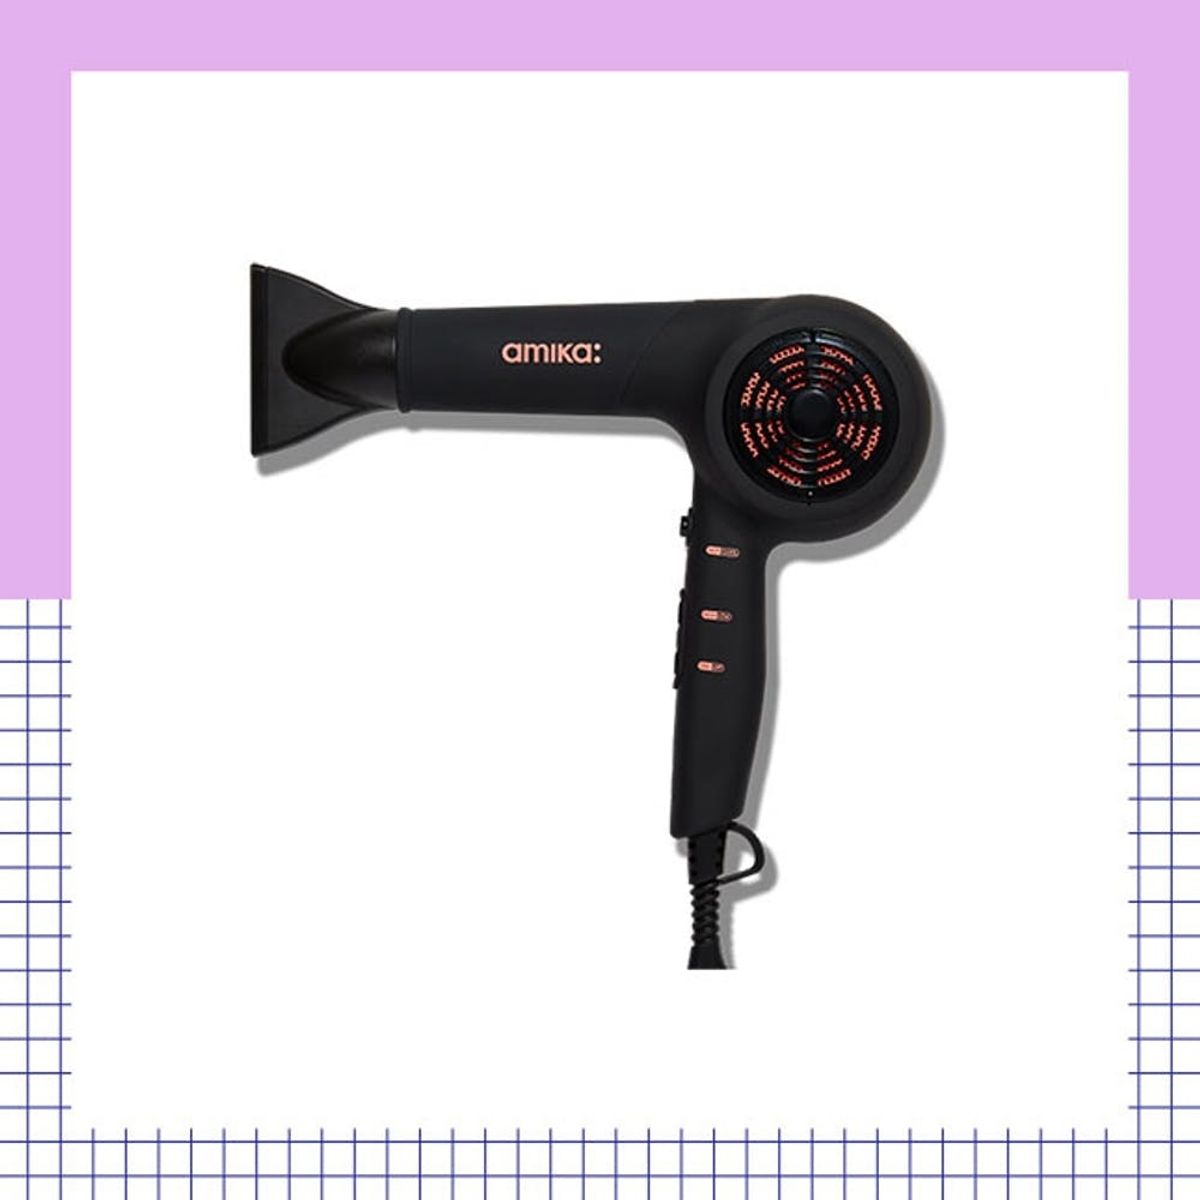 This New Hair Dryer Is Designed to Be the Last You’ll EVER Need